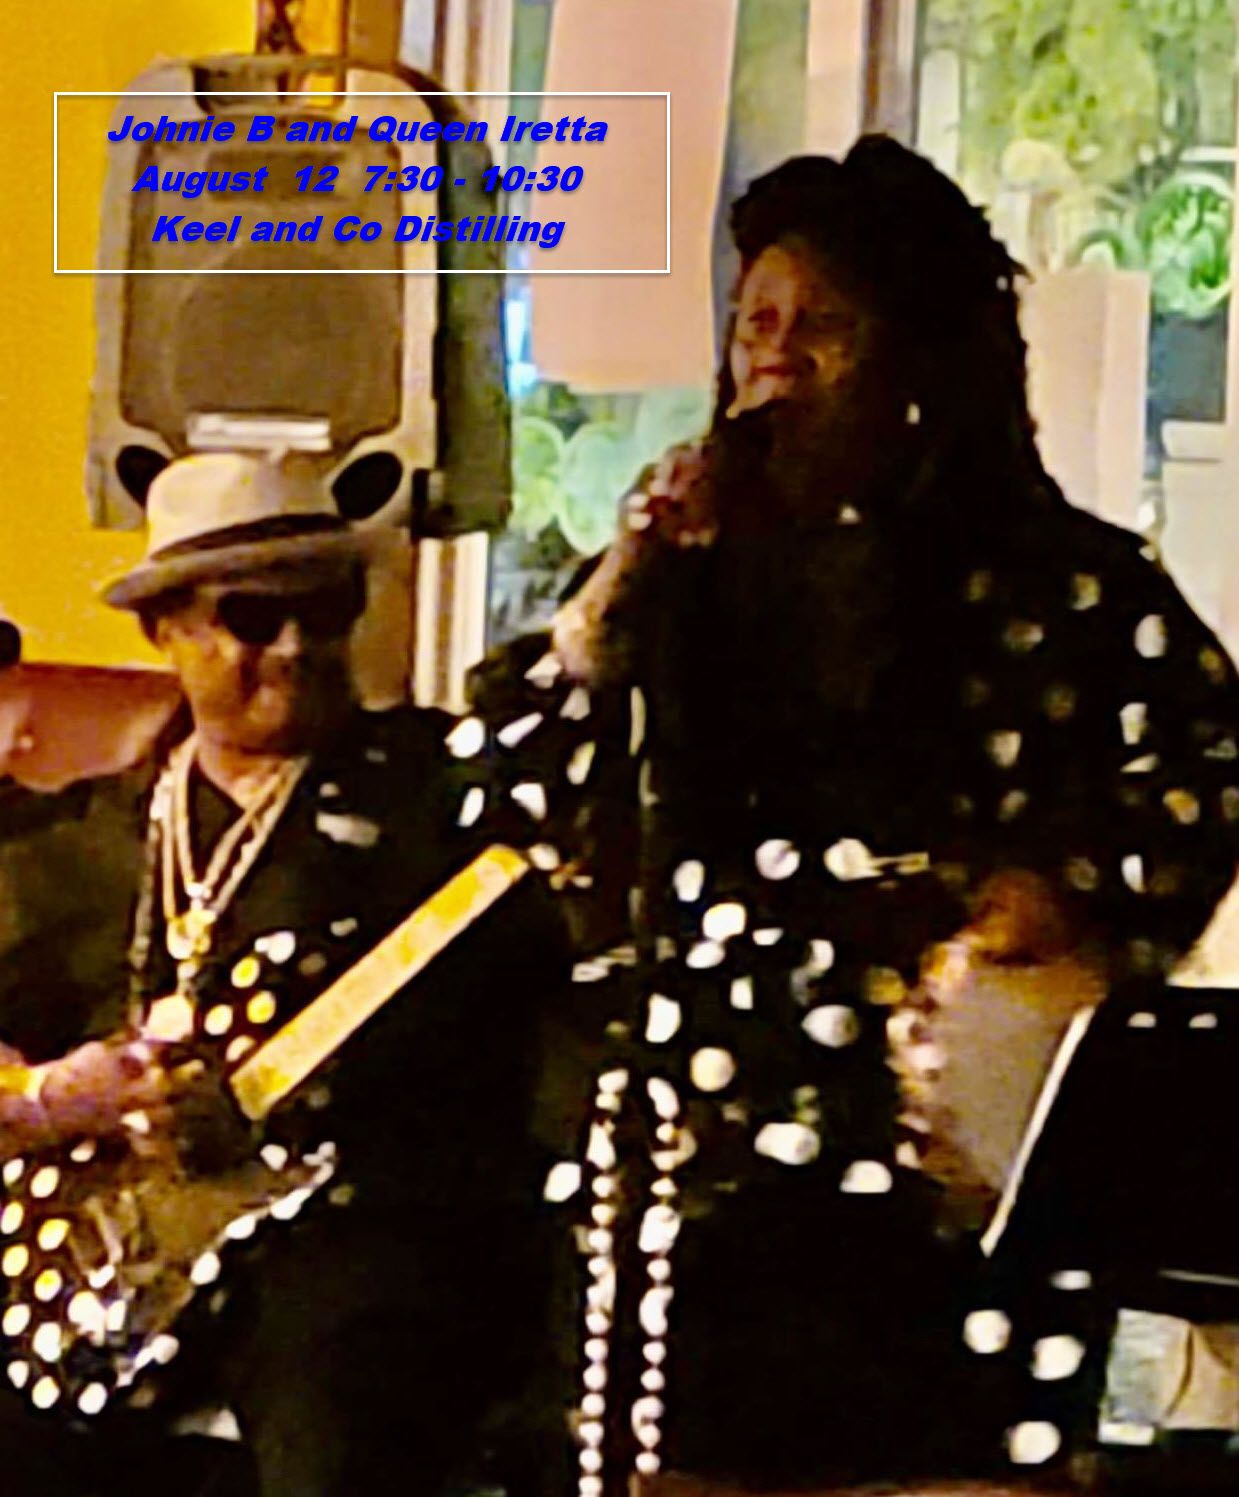 Johnie and Queen Iretta Live at the Keel and Co, Distillery